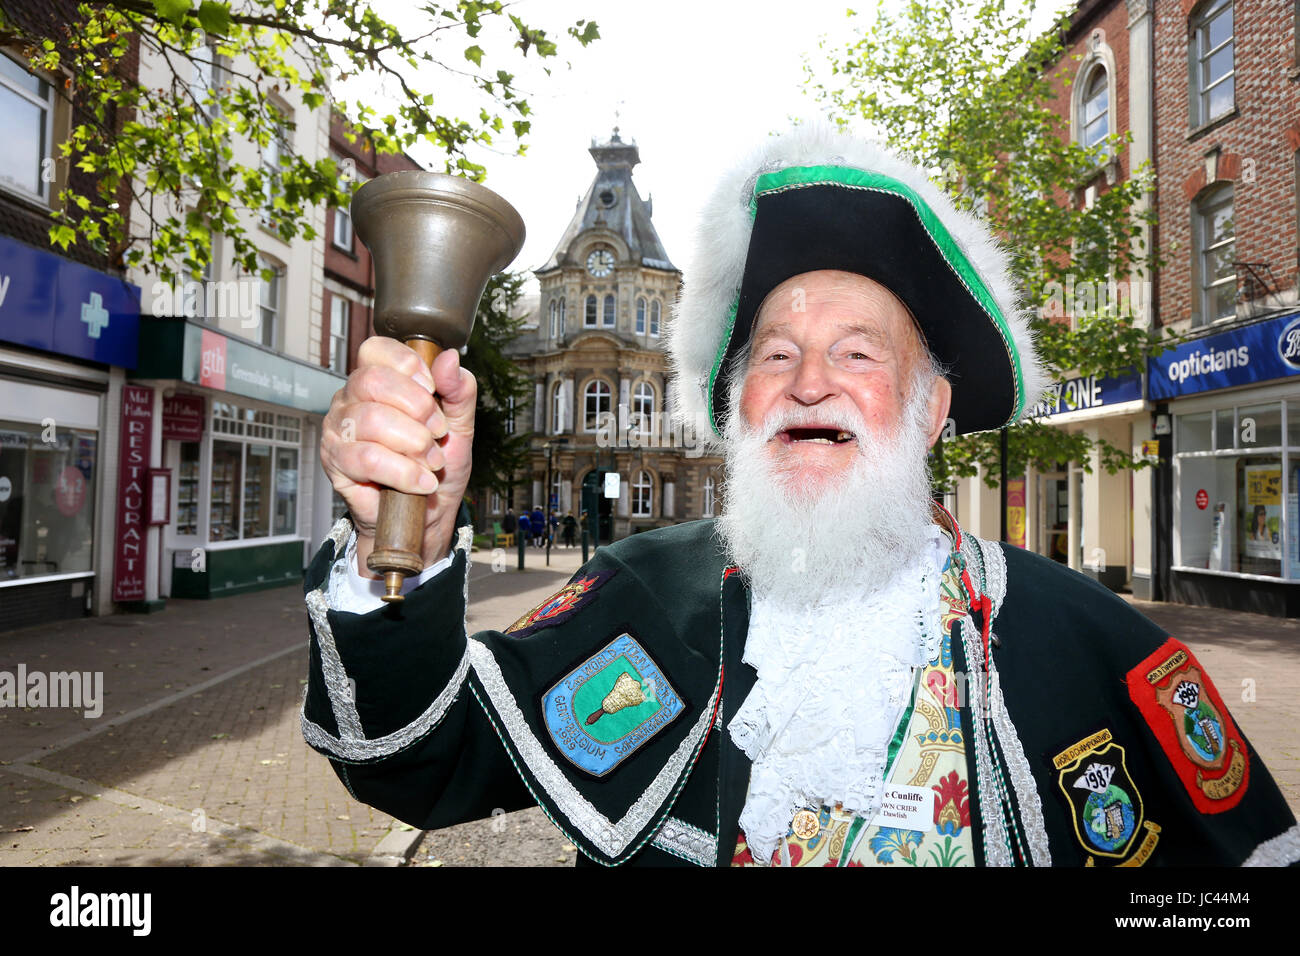 Pic by Mark Passmore. 27/05/2017 Oyez, Oyez...Pictured is Steve Cunliffe, the Town Crier for Dawlish, pictured in the historic market town of Tiverton Stock Photo